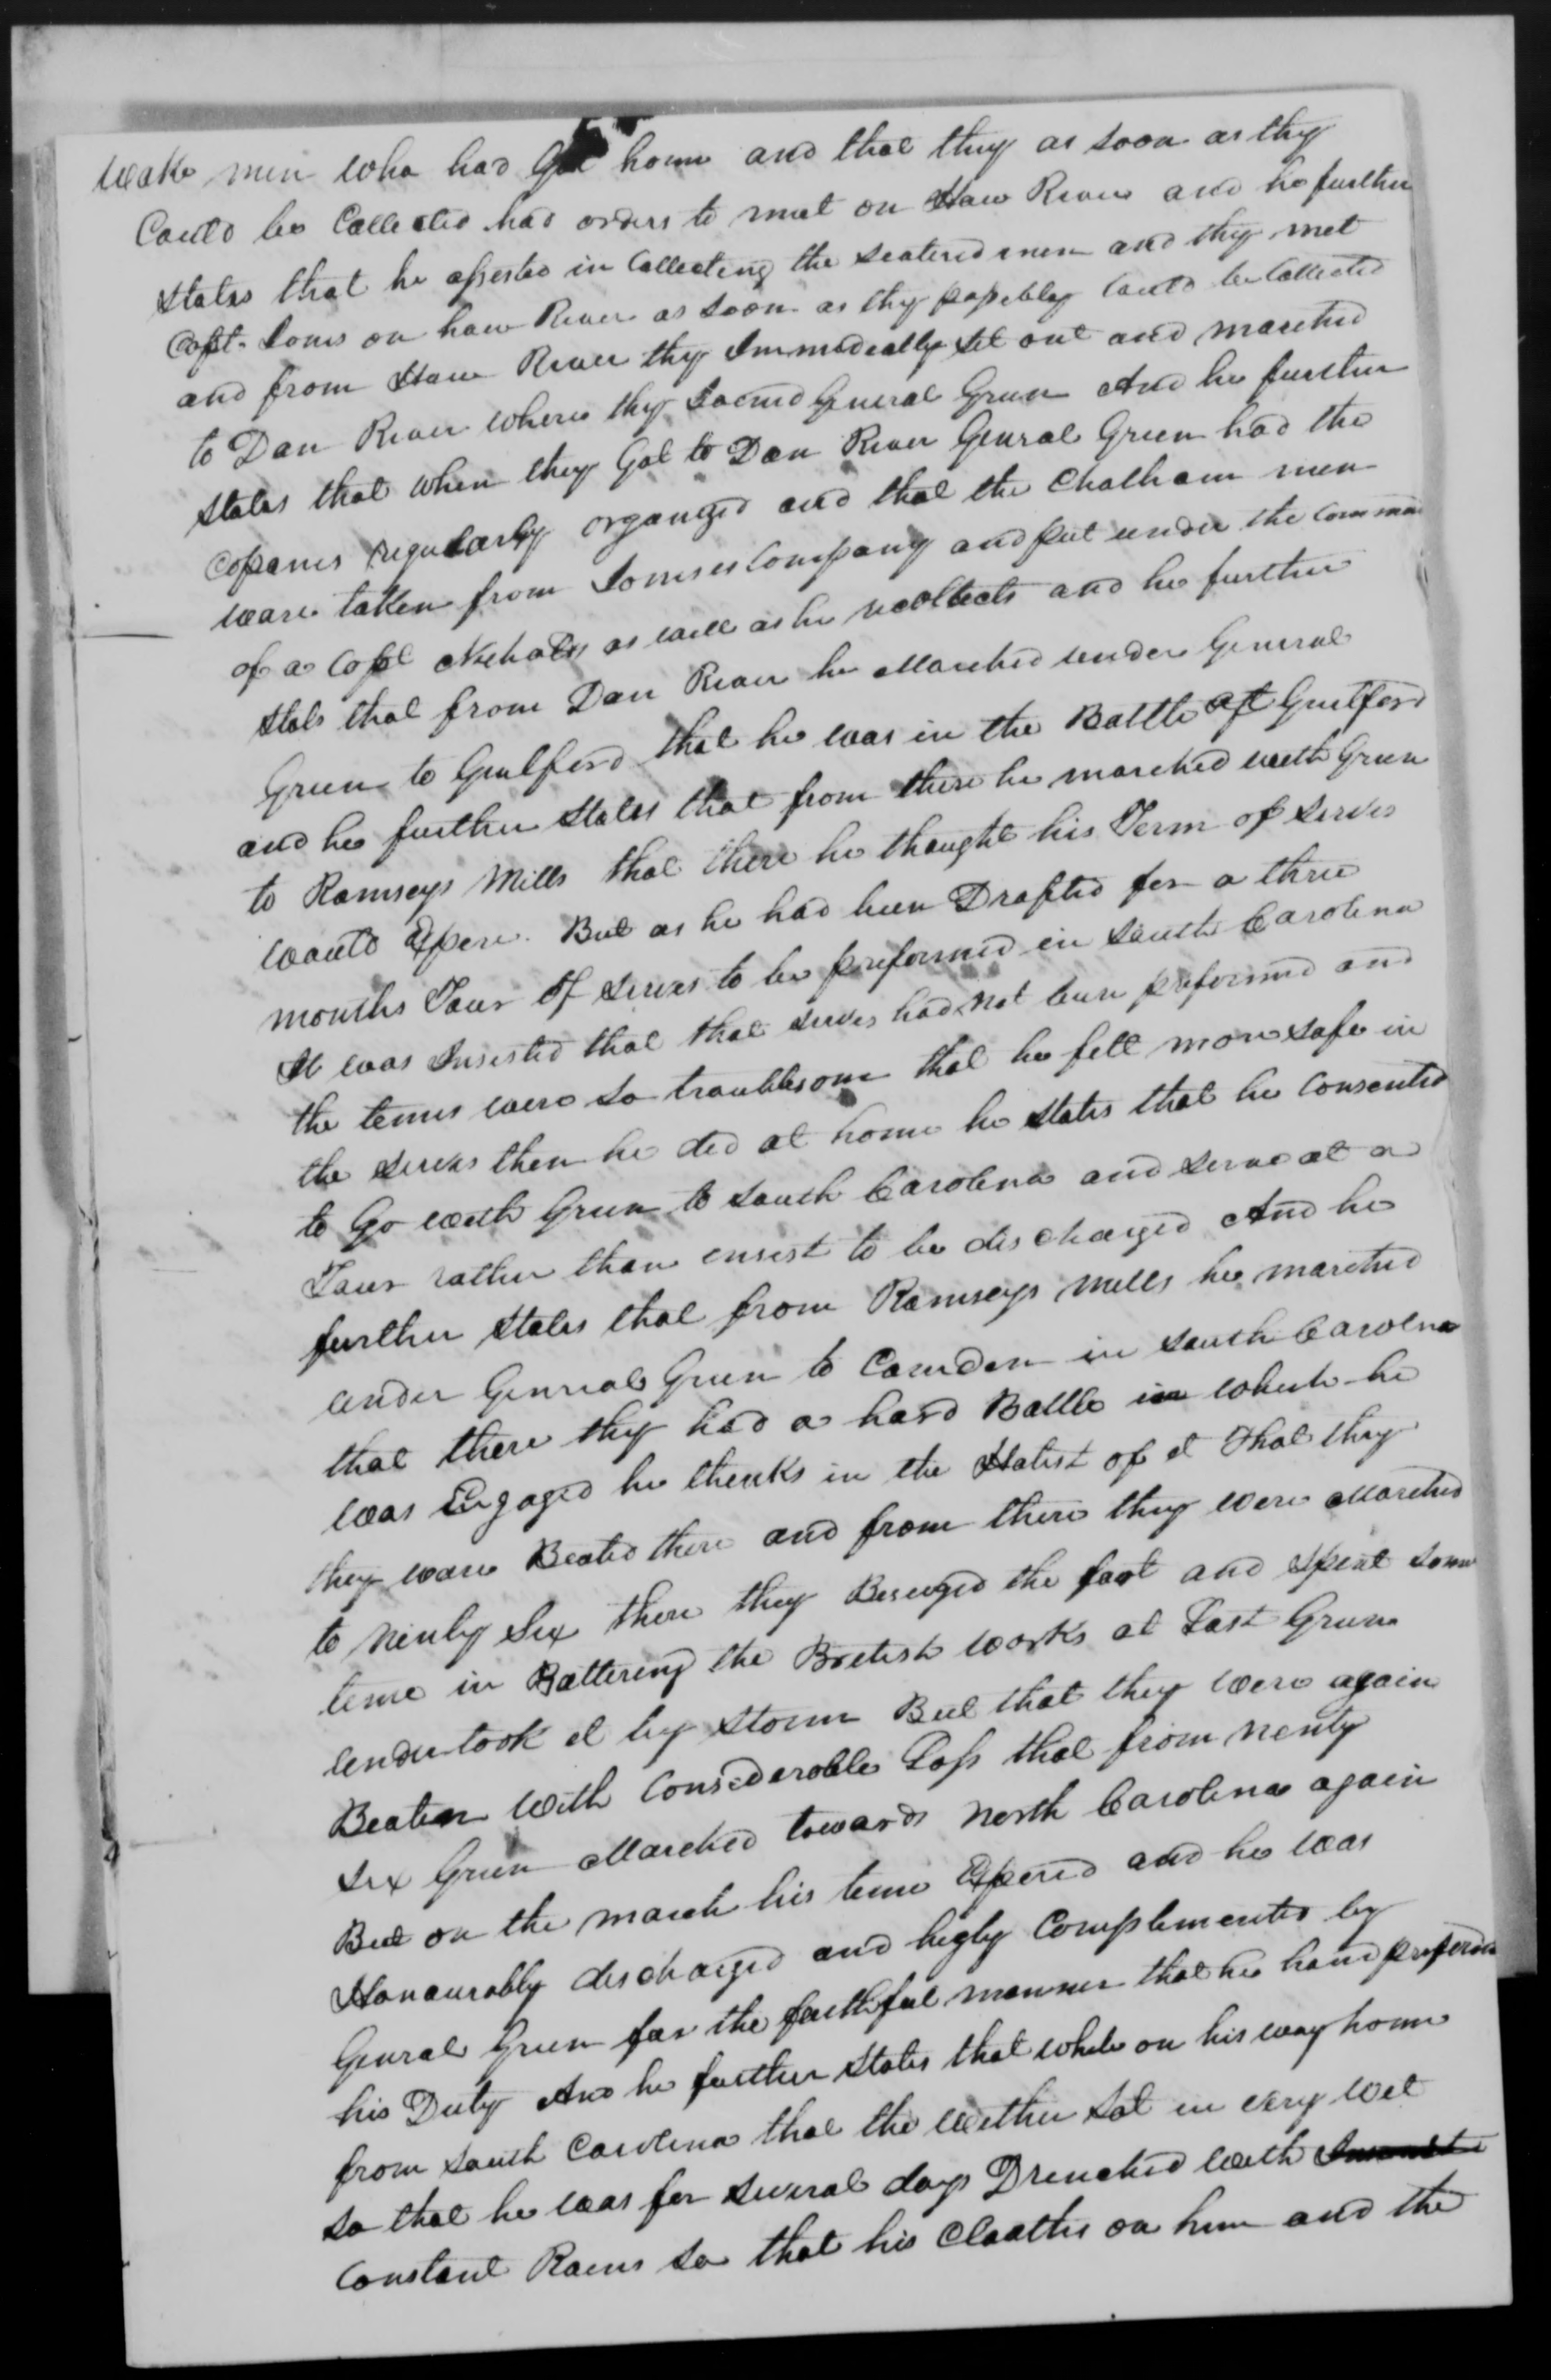 Application for a Veteran's Pension from Nathan Yarborough, 5 August 1833, page 3